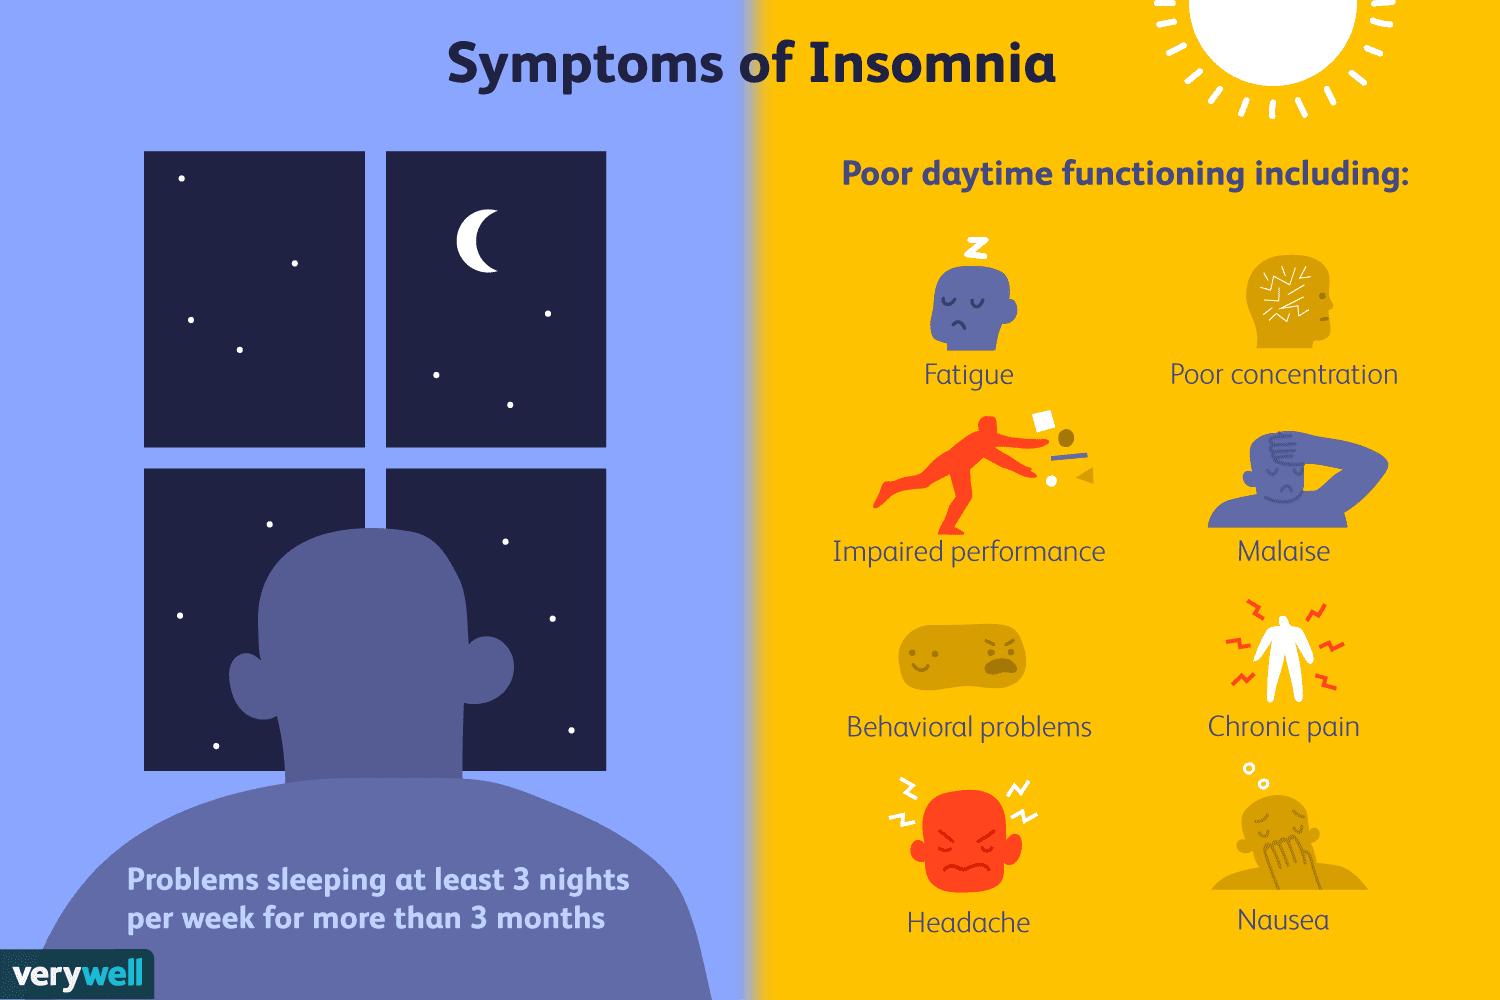 What are some common triggers for acute insomnia?